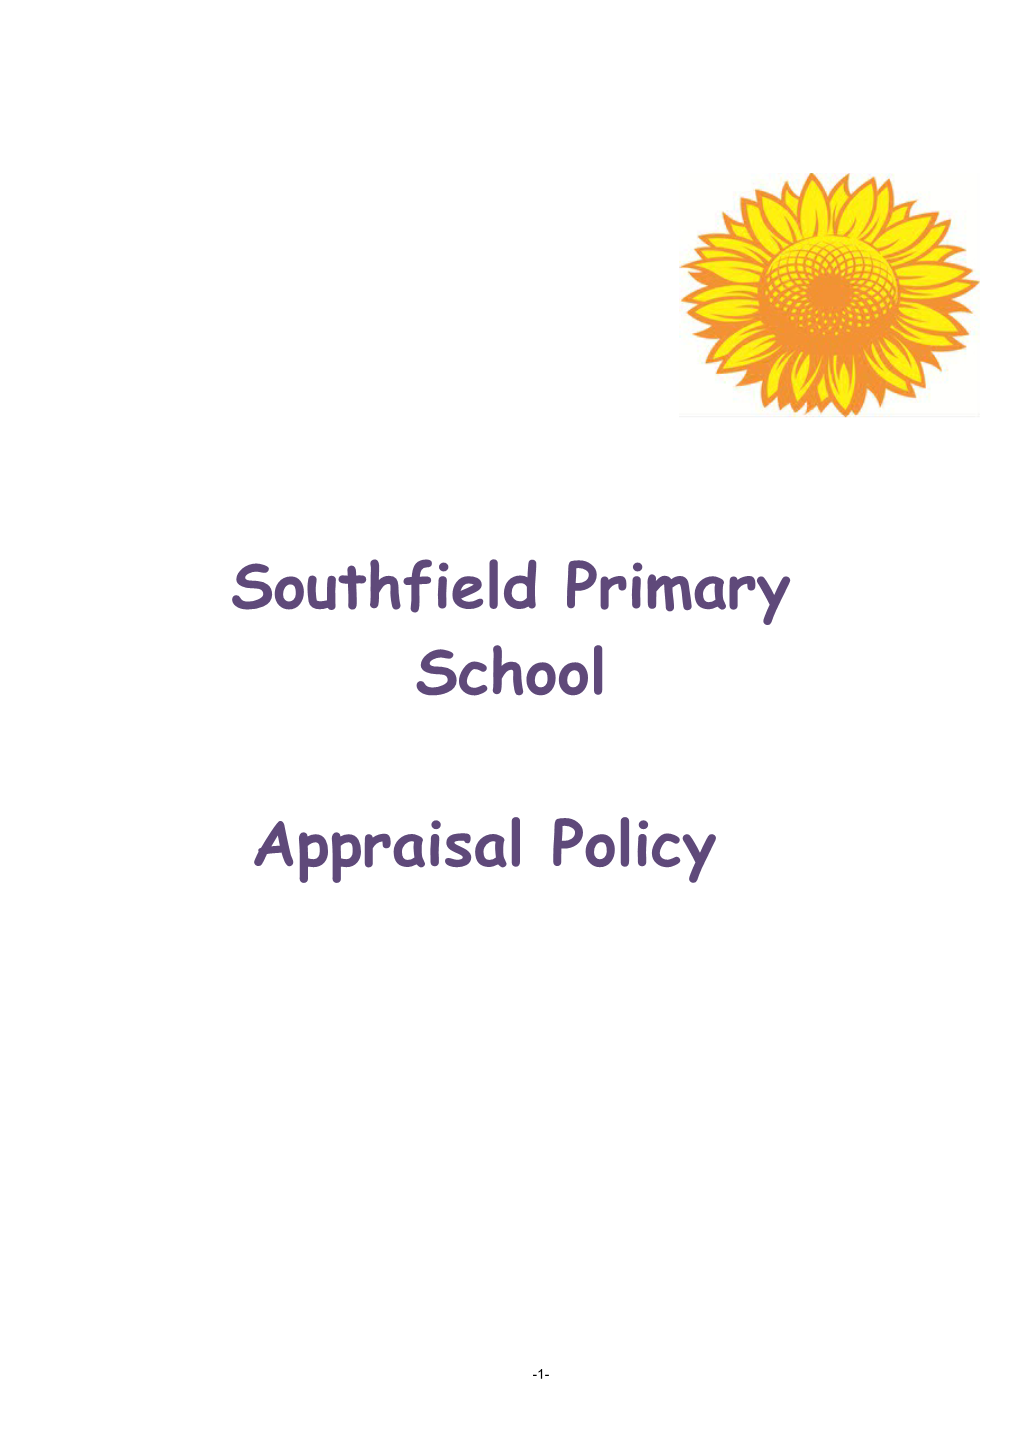 Southfield Primary School Policy for Appraising Teacher Performance